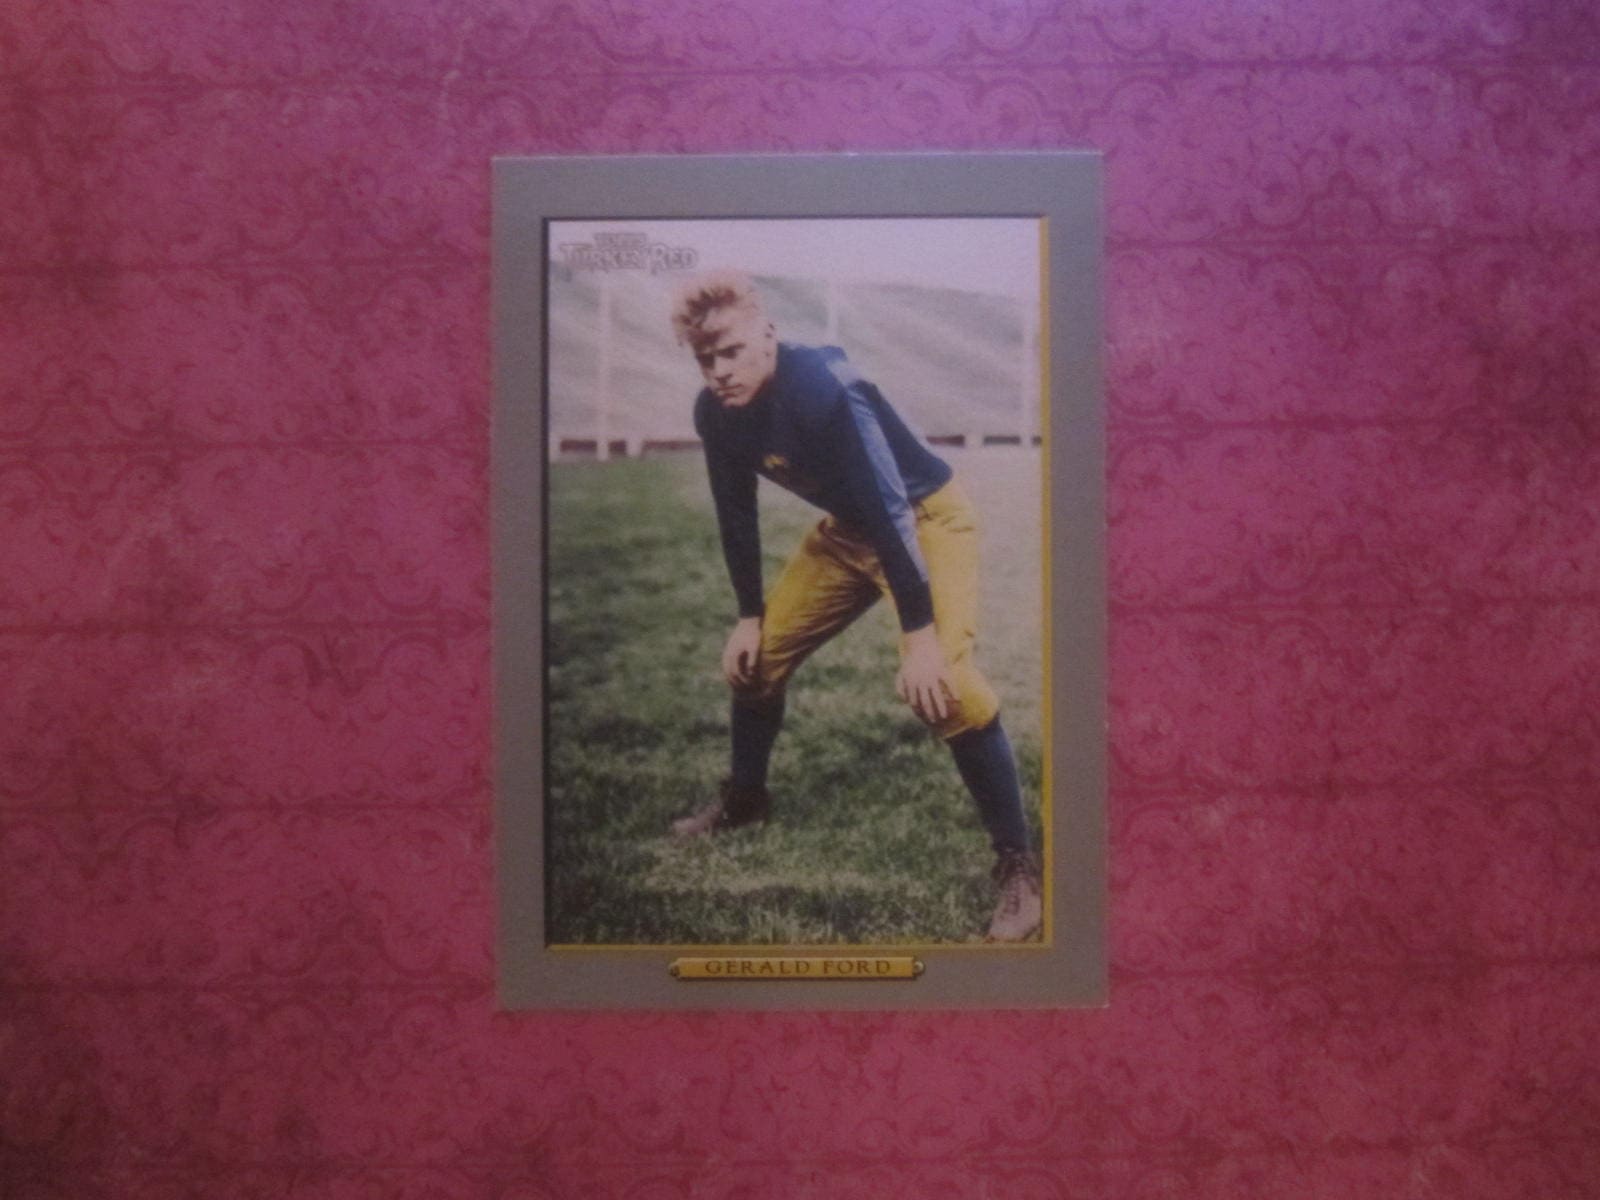 Topps Card of University of Michigan football star Gerald Ford